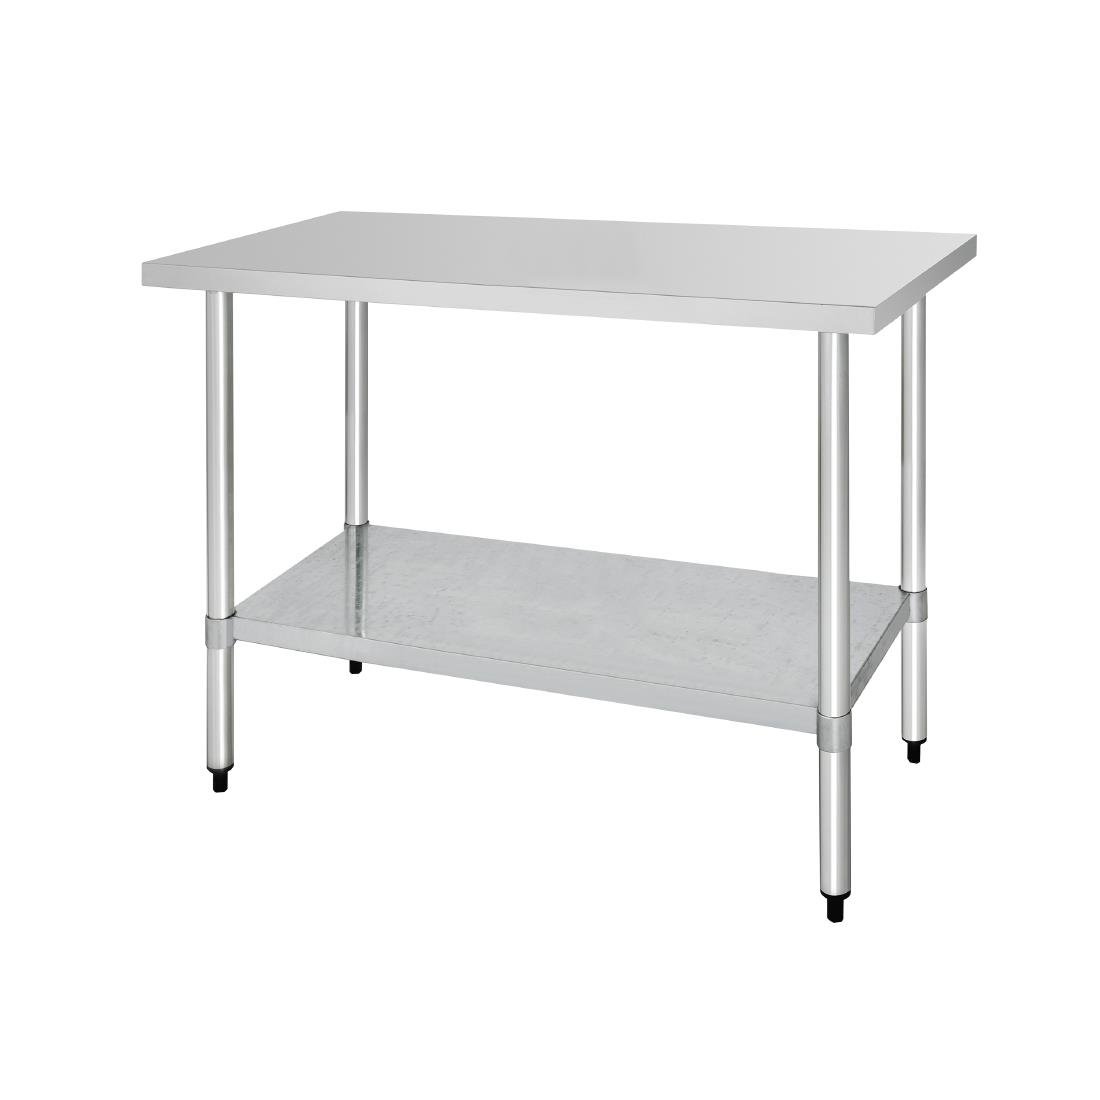 Vogue Stainless Steel Prep Table 1200mm (900(H) x 1200(W) x 700(D)mm)